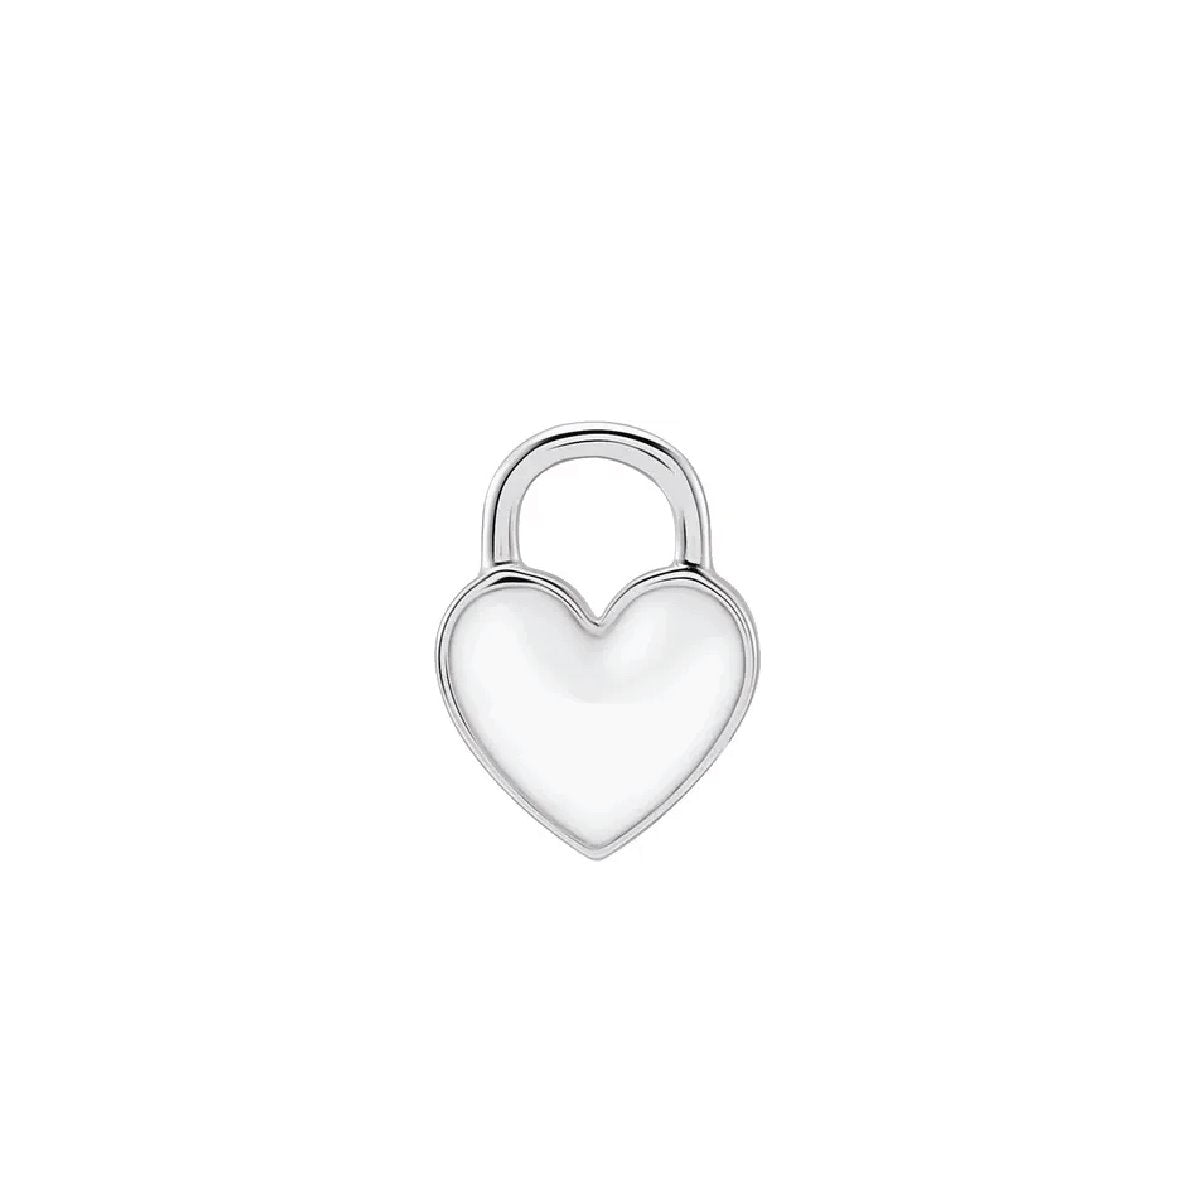 White Enamel Heart Necklace or Charm Necklace Robyn Canady Sterling Silver No Chain/Charm Only 